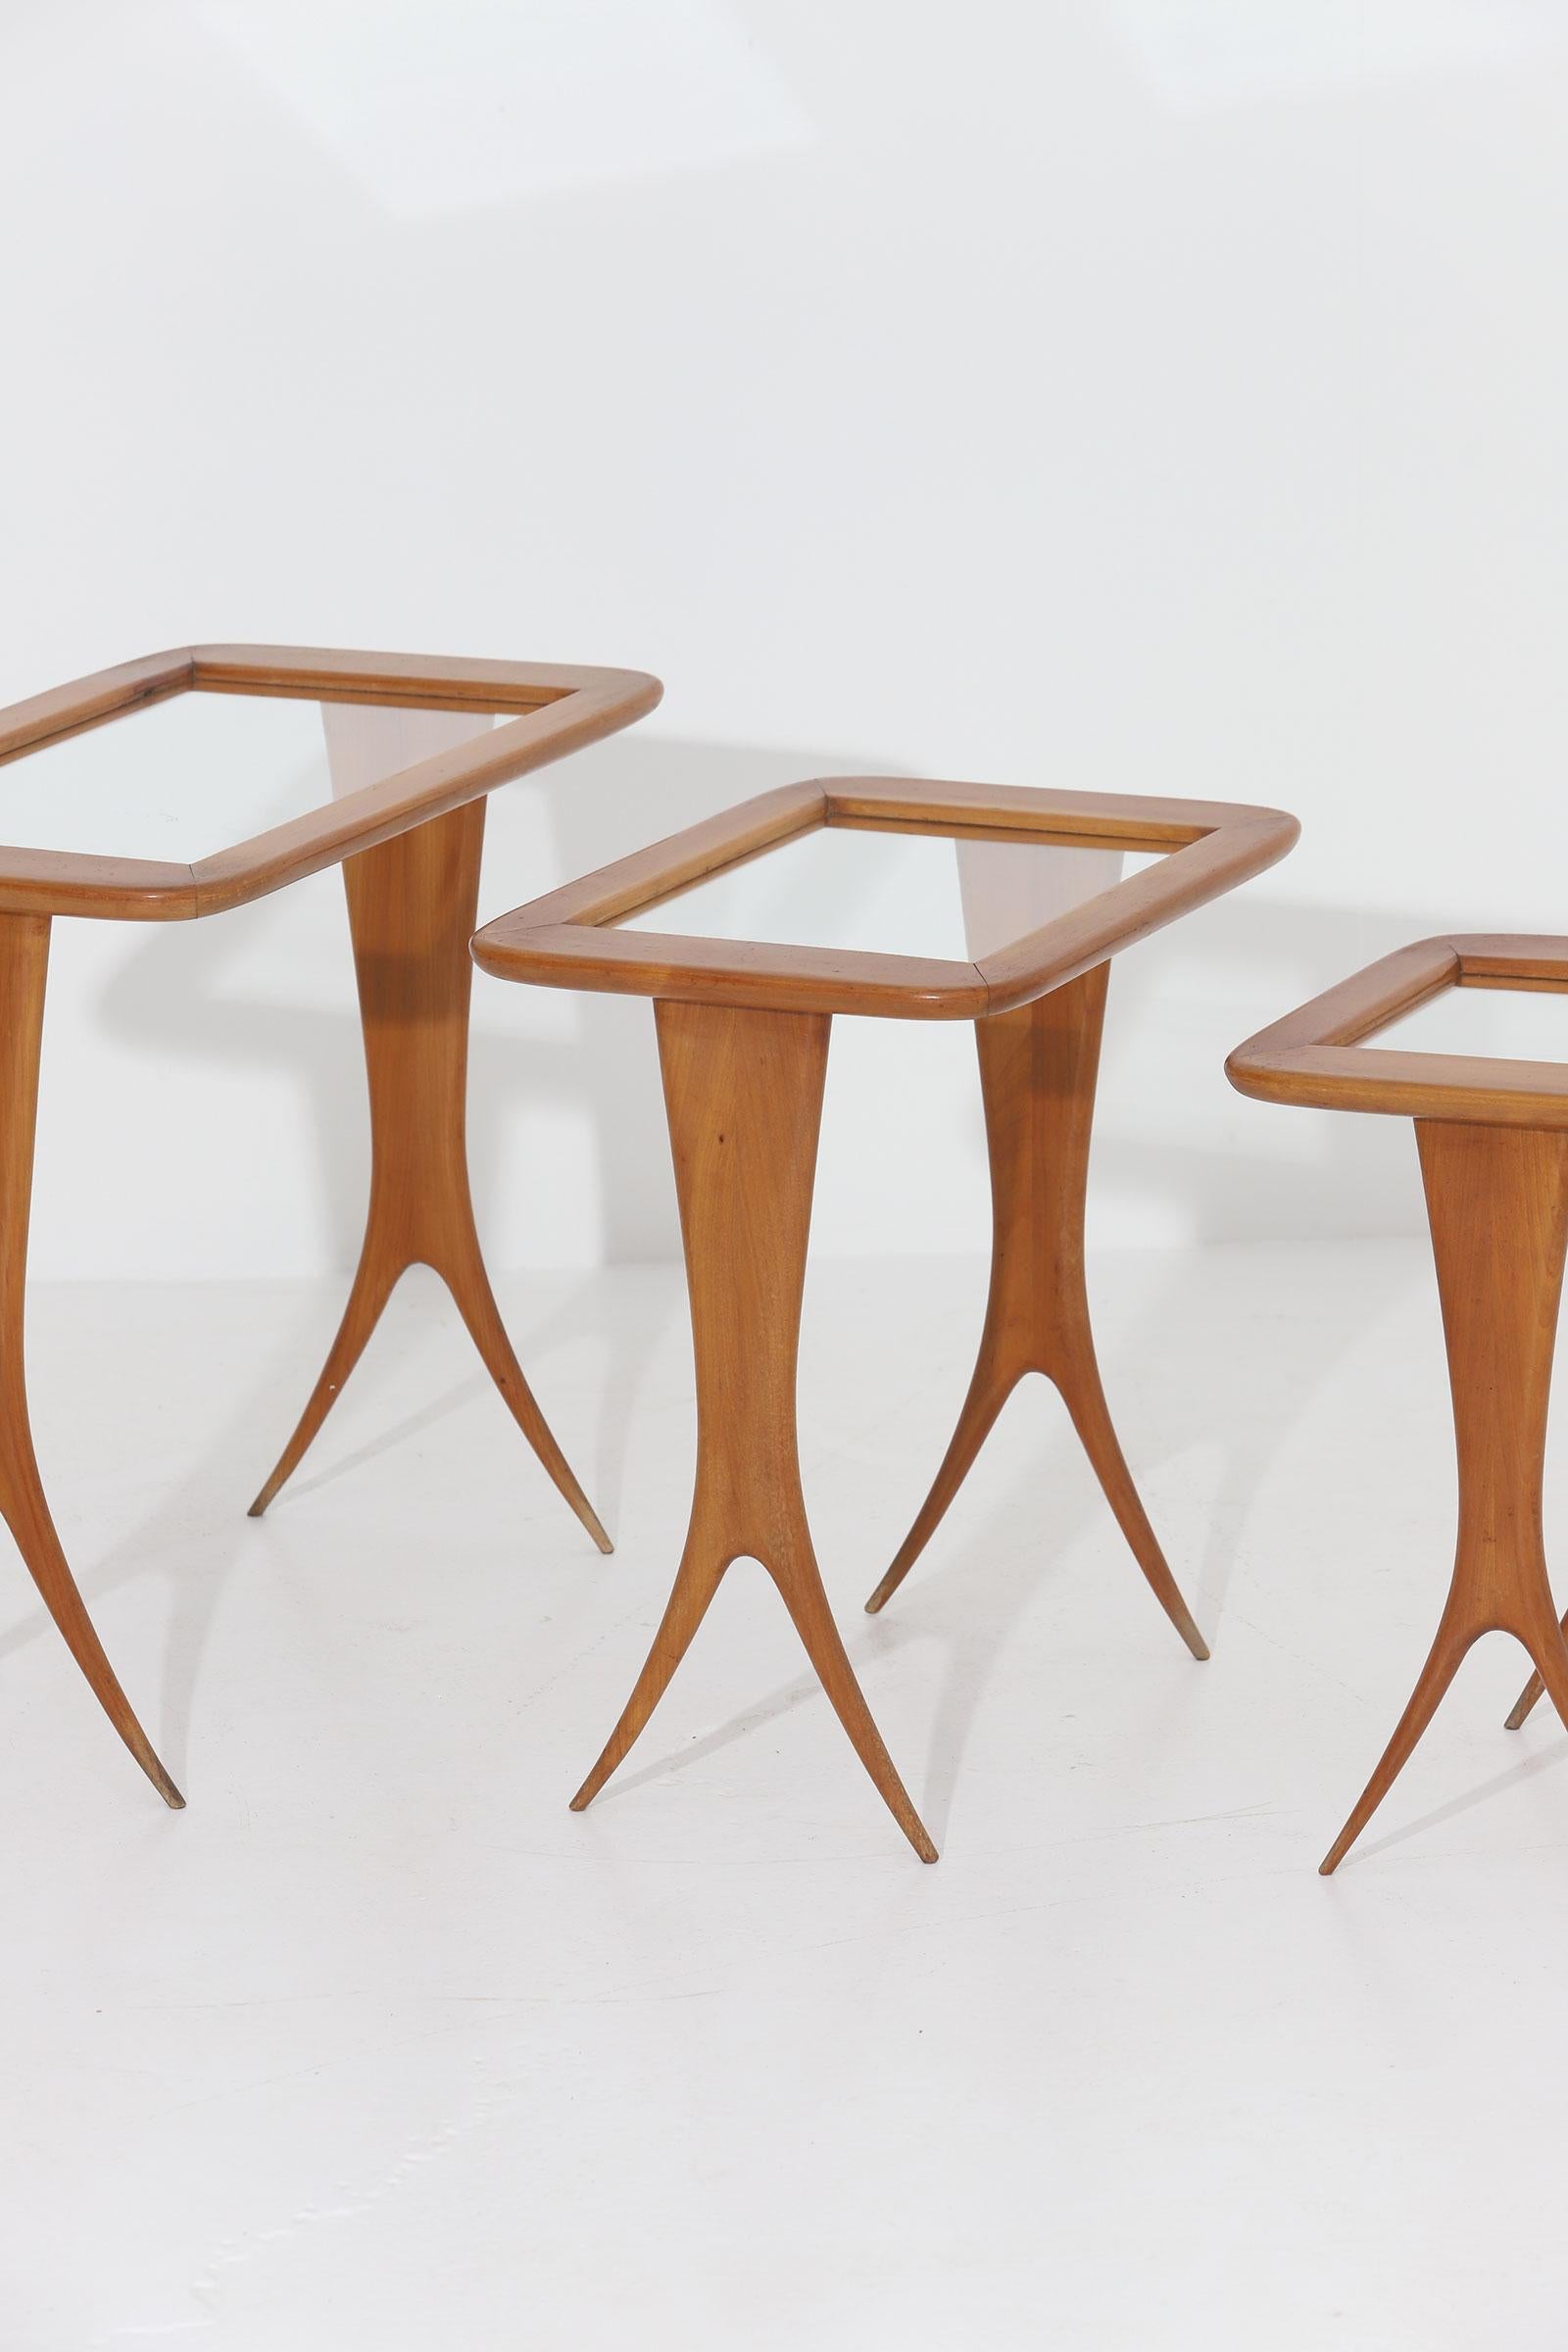 Walnut nesting tables, by Raphael, France, 1950s.

Set of three highly decorative nesting tables from the 1950s. An Elegant and sculptural set in a warm colored wood, each with a built- in glas top. The tables are light in weight, tight and